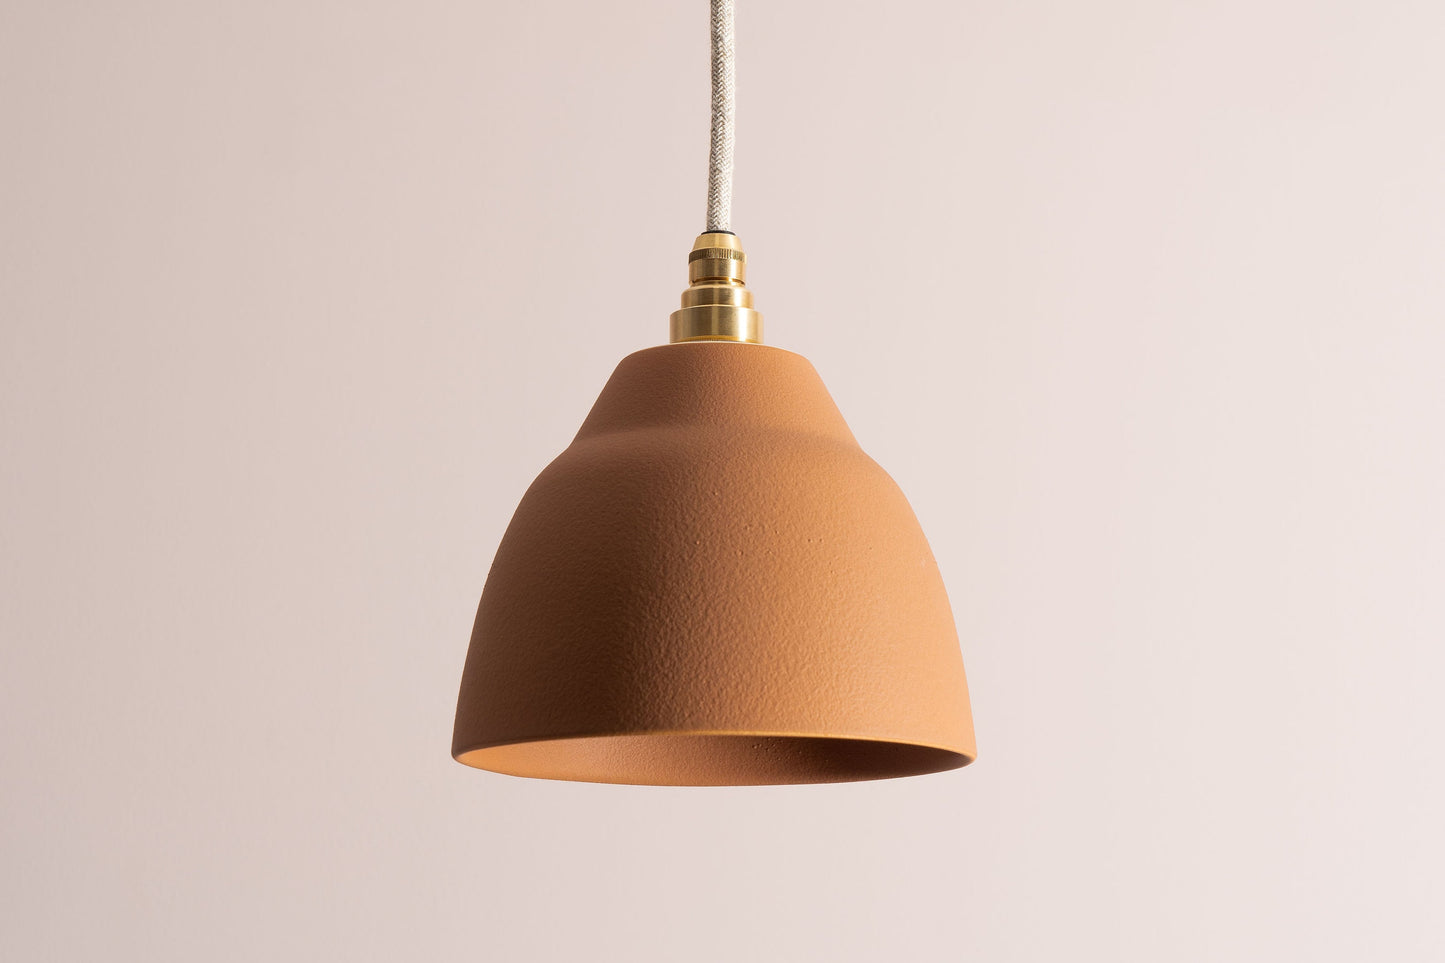 Small Terracotta Element Pendant Light in Ceramic and Brass/Nickel by StudioHaran